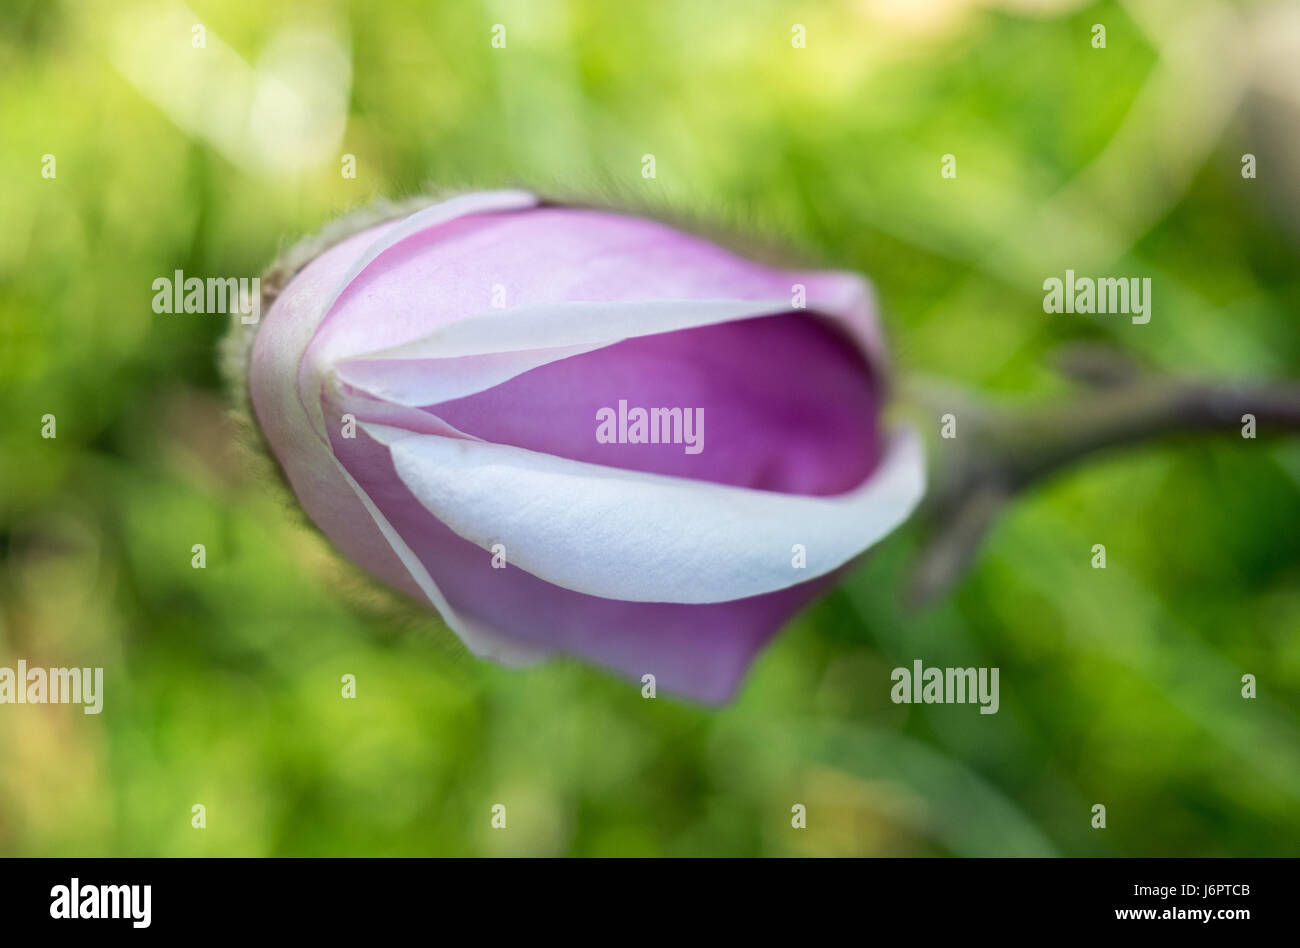 a close up macro detail Magnolia bud and sepals budding opening blooming blossoming pink purple mauve in spring Stock Photo